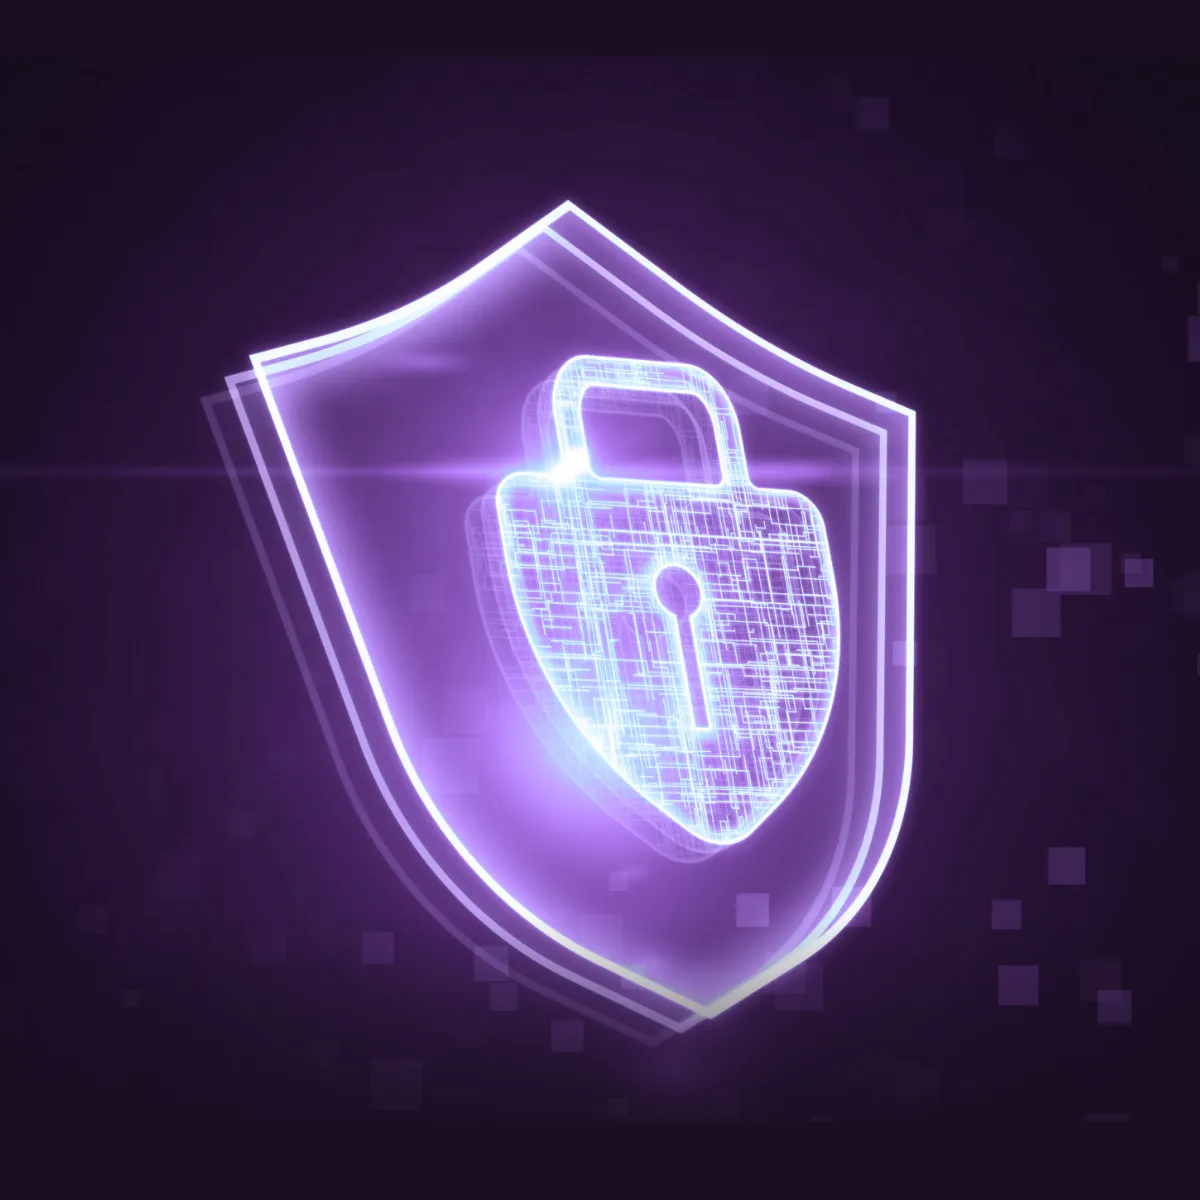 Purple glowing shield and lock, that looks digital, to signify digital fraud detection and prevention